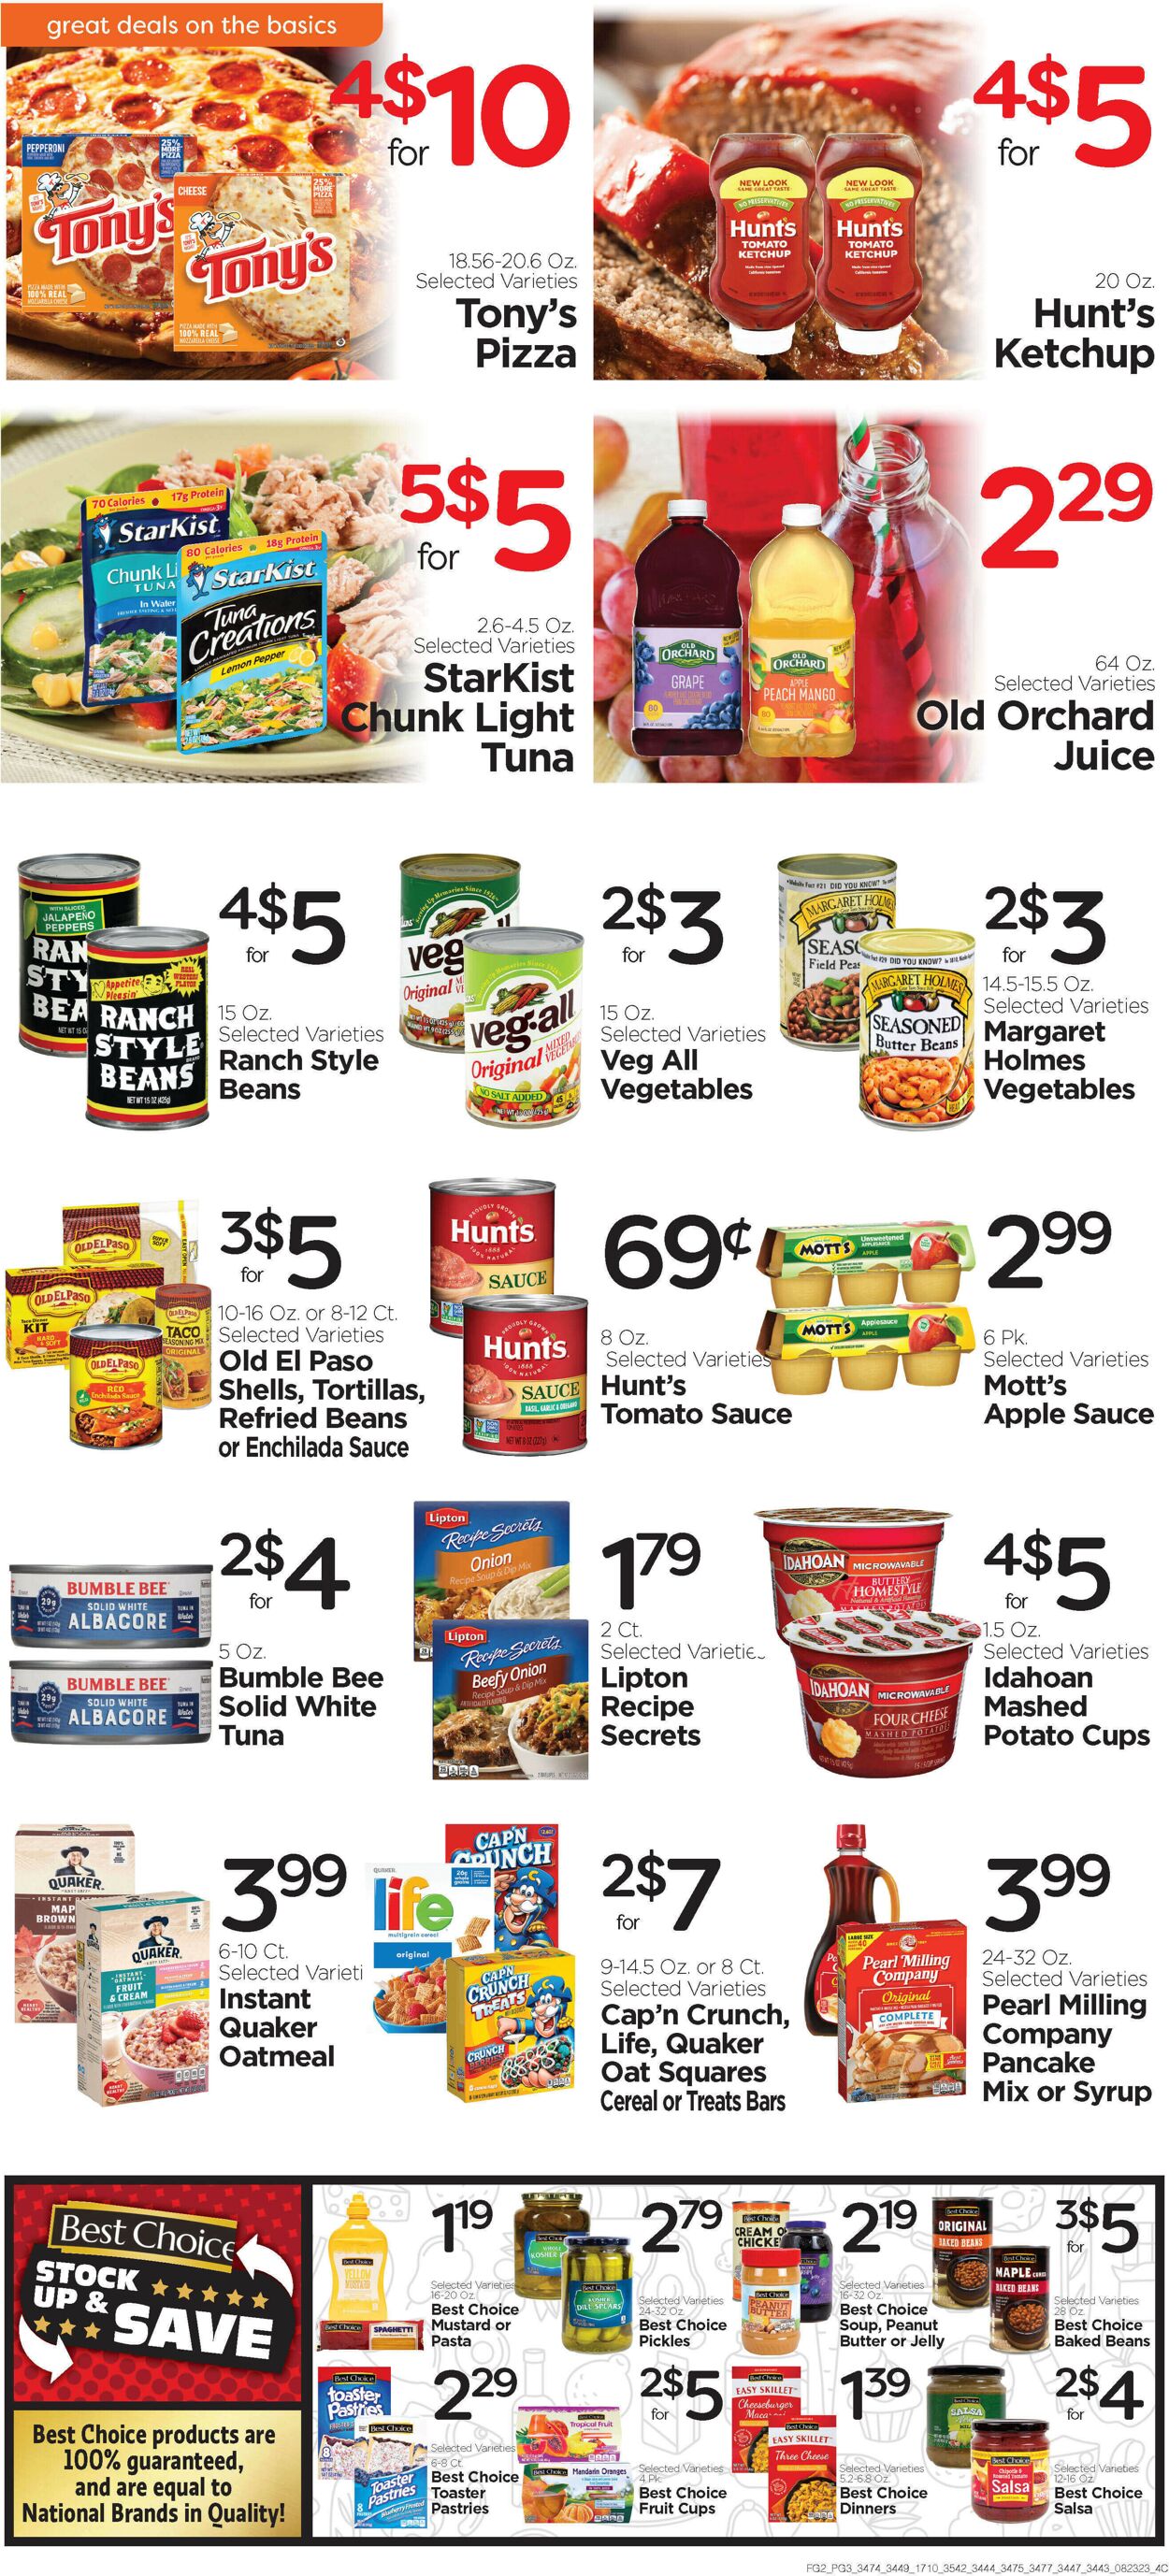 Edwards Food Giant Ad from 08/23/2023